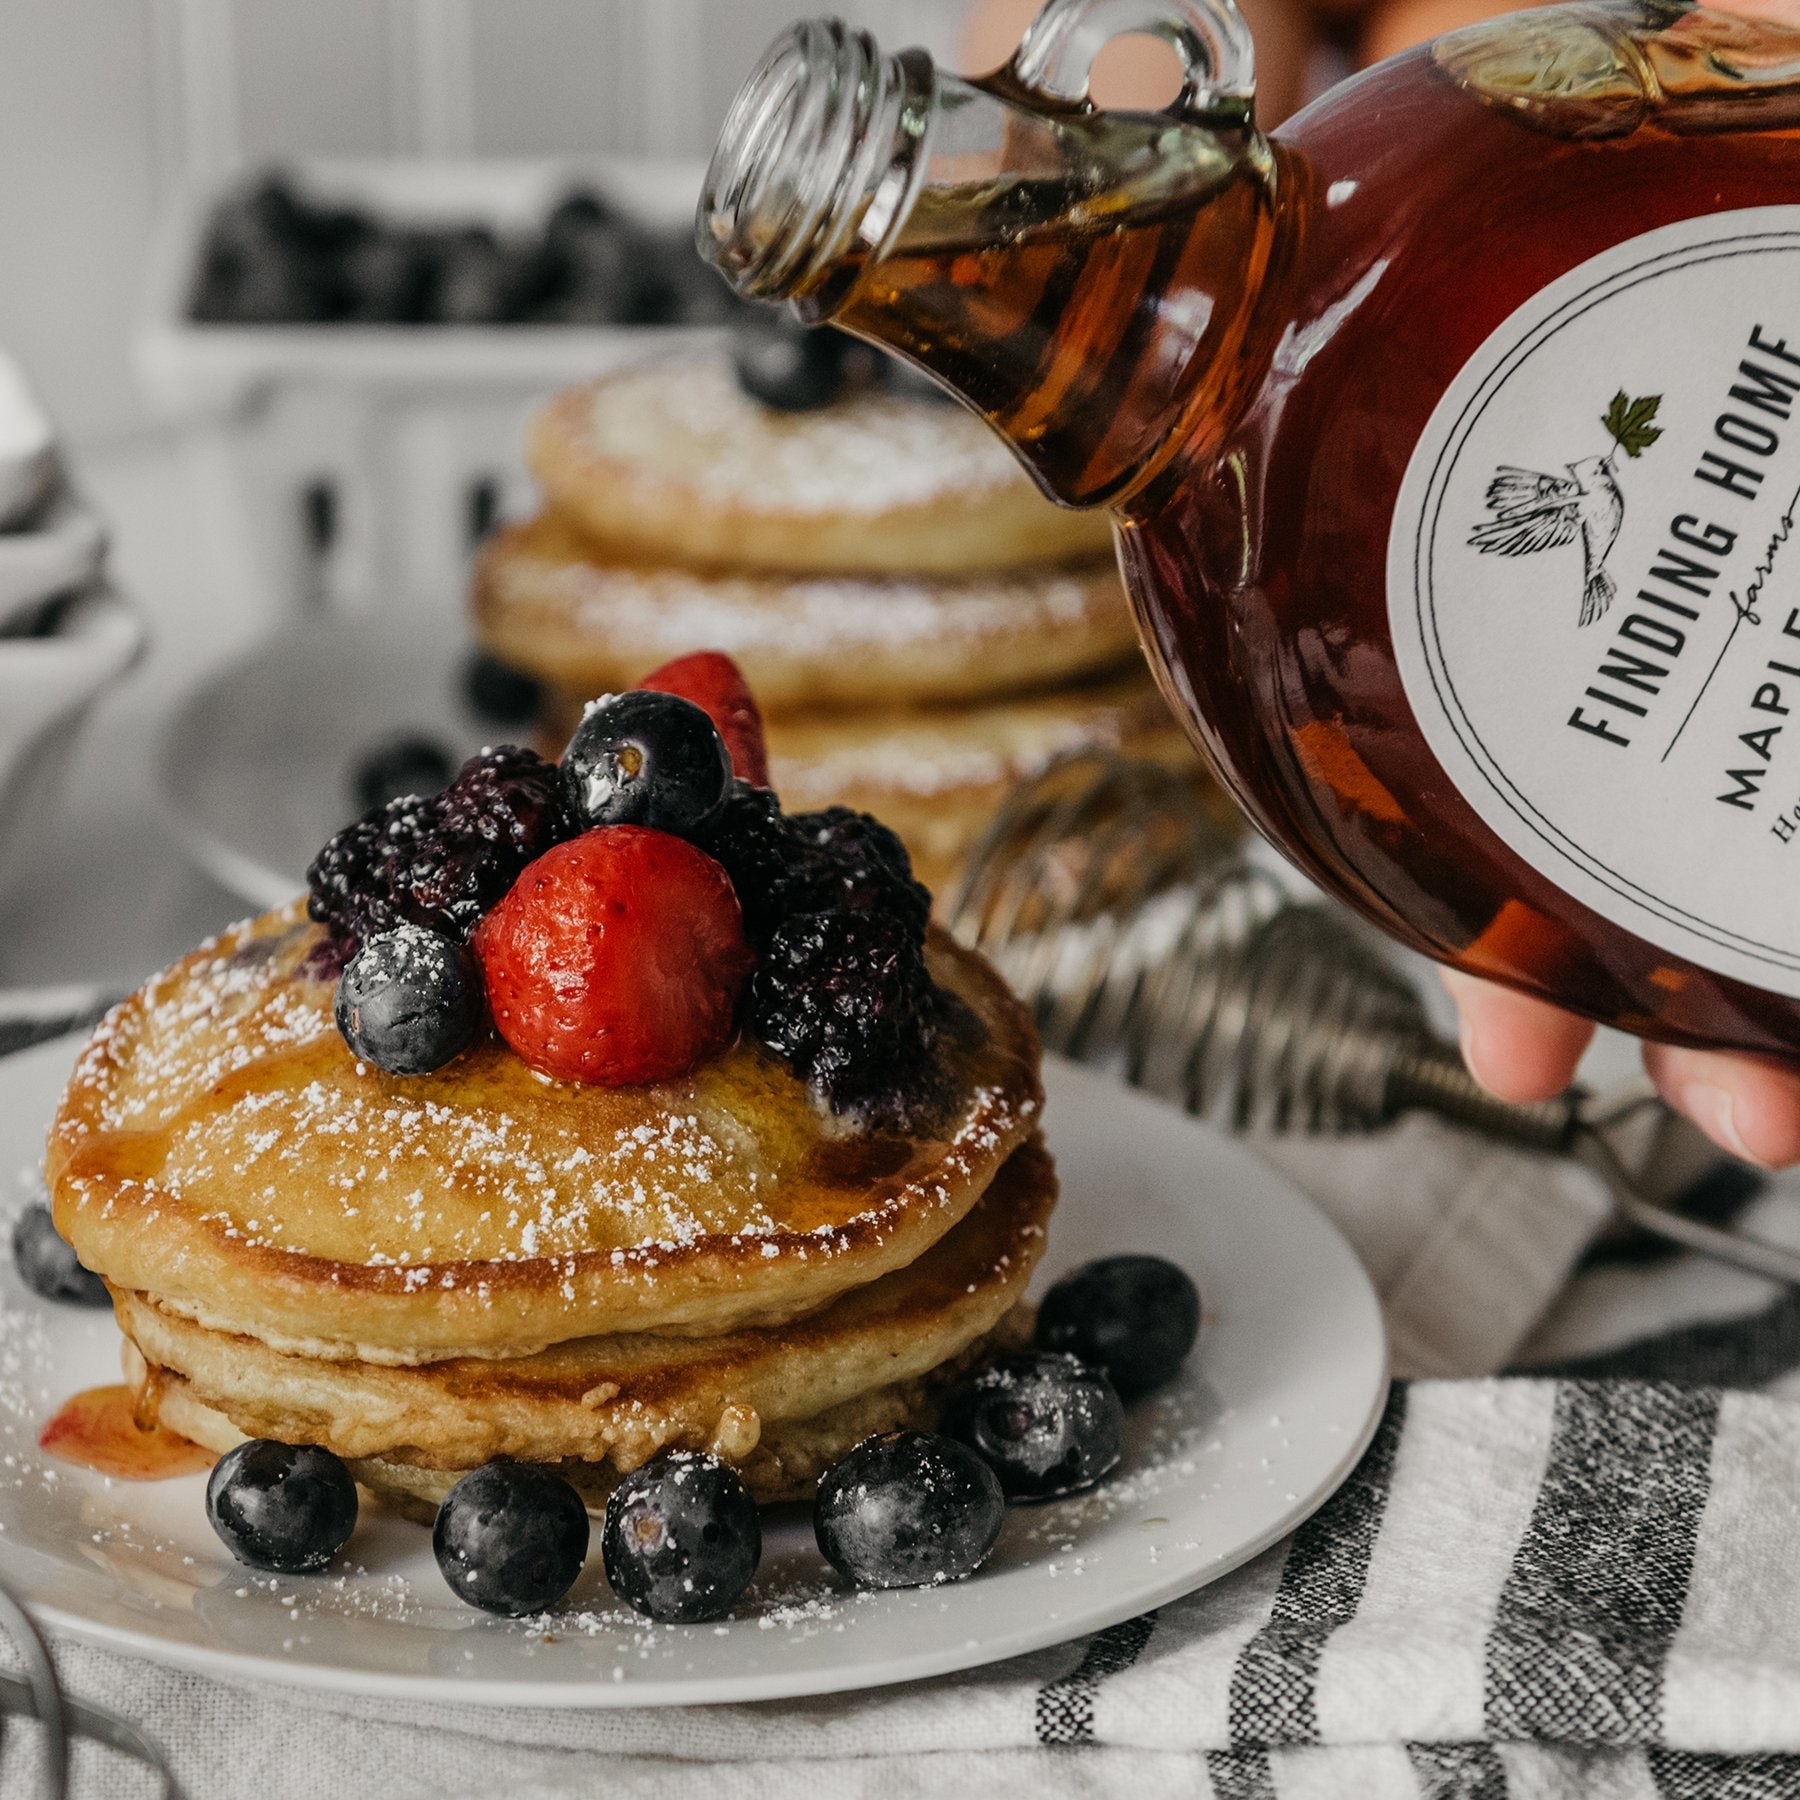 Organic Maple Syrup (8 oz) | Sudha’s Emporium Gourmet, Gifts & Décor | Corning, NY